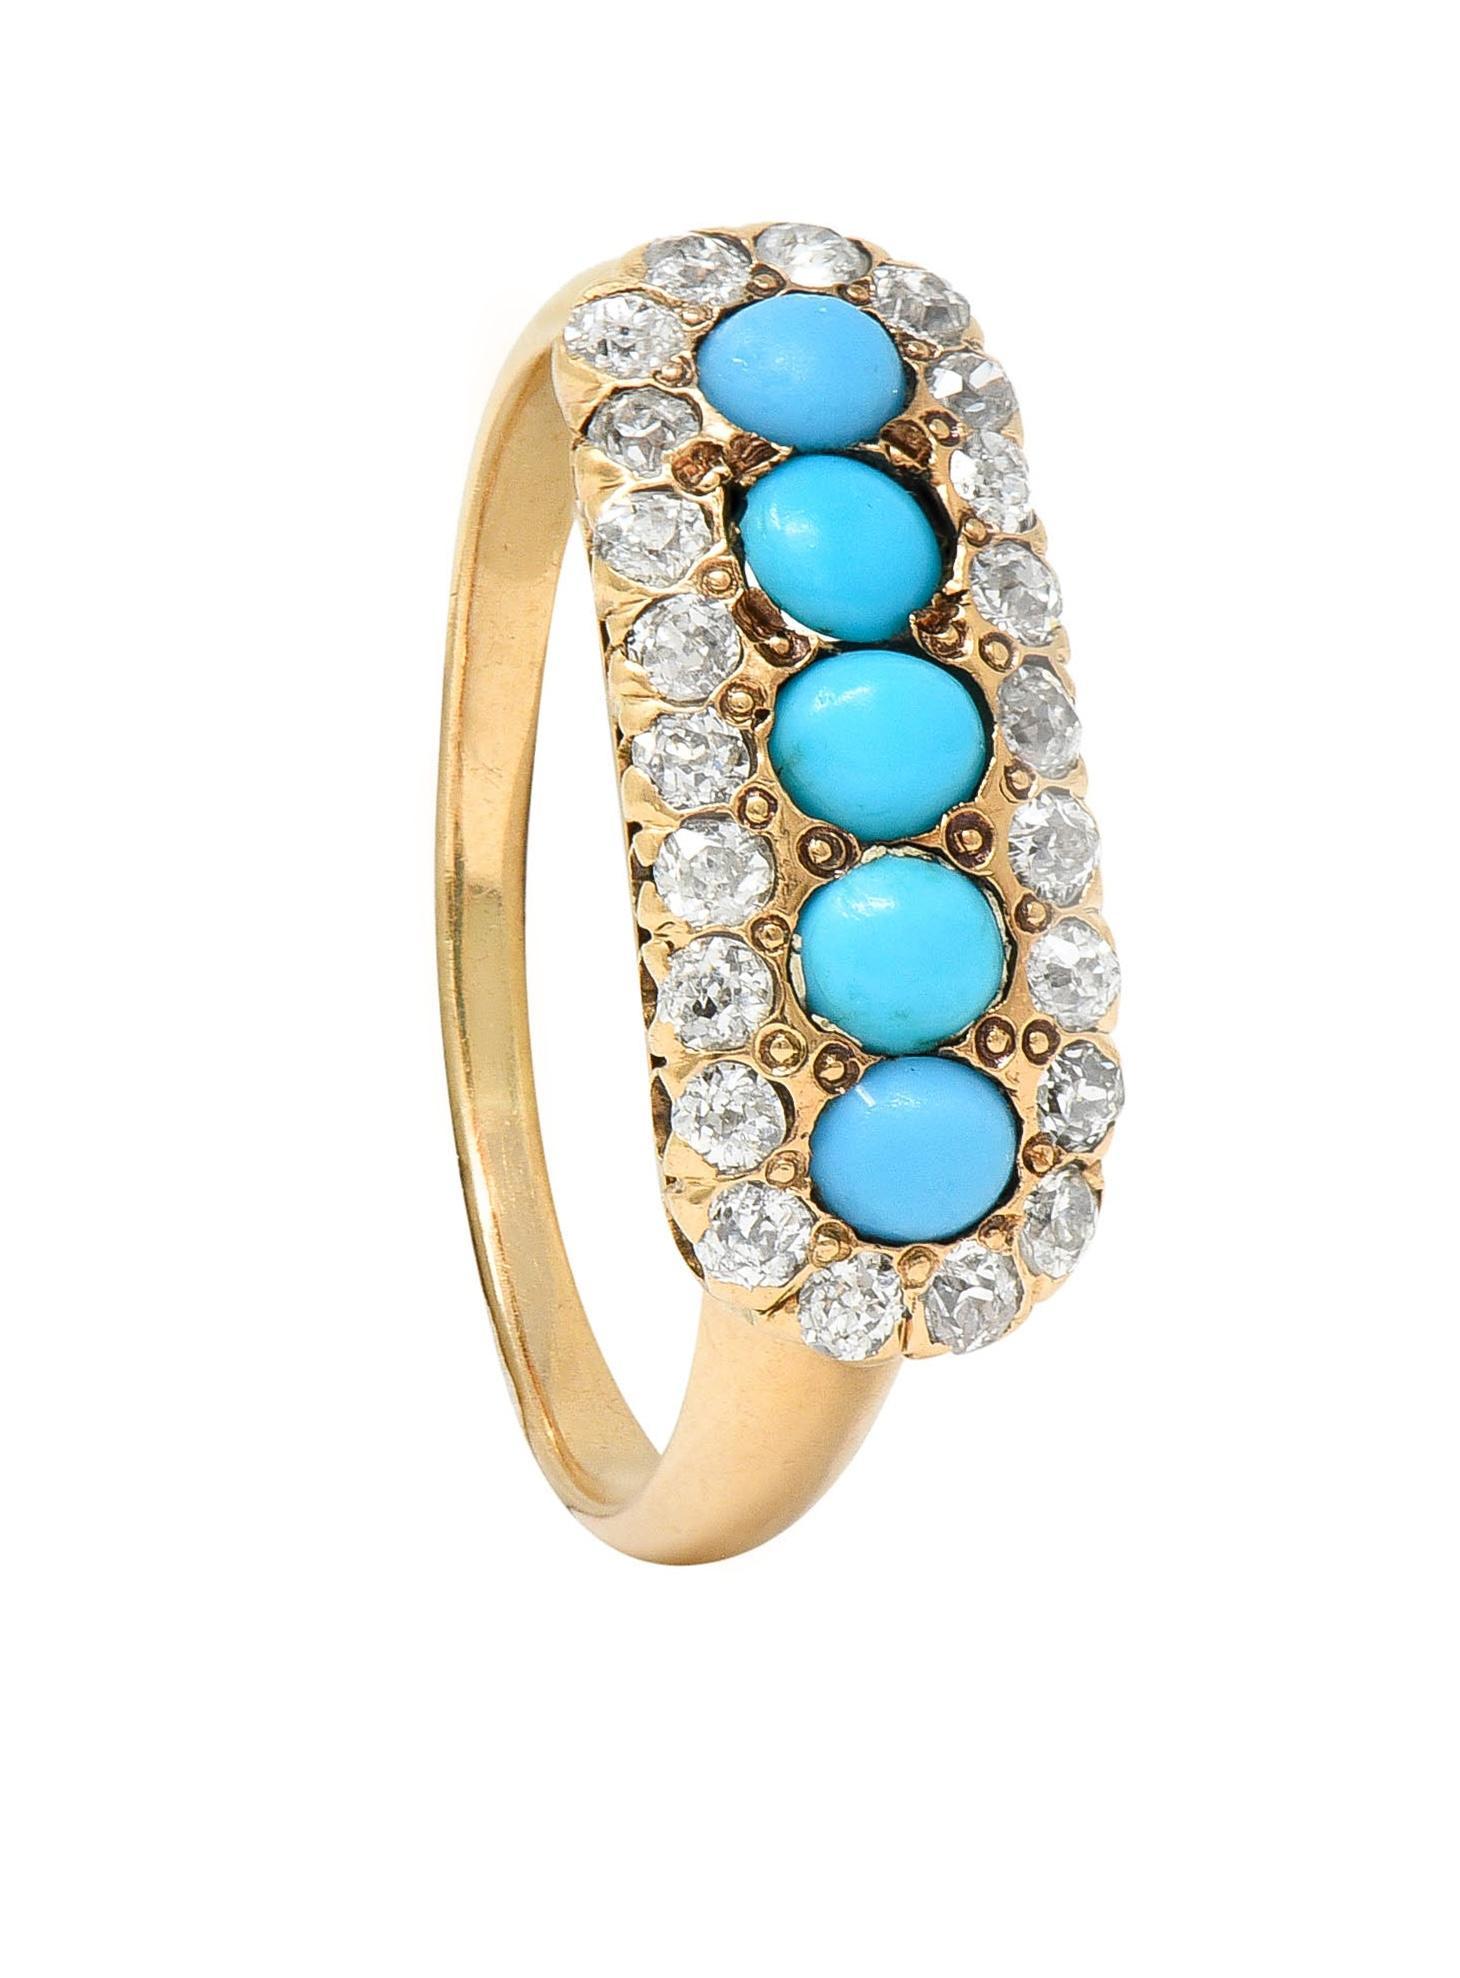 Victorian Diamond Turquoise Cabochon 14 Karat Yellow Gold Antique Cluster Ring For Sale 6